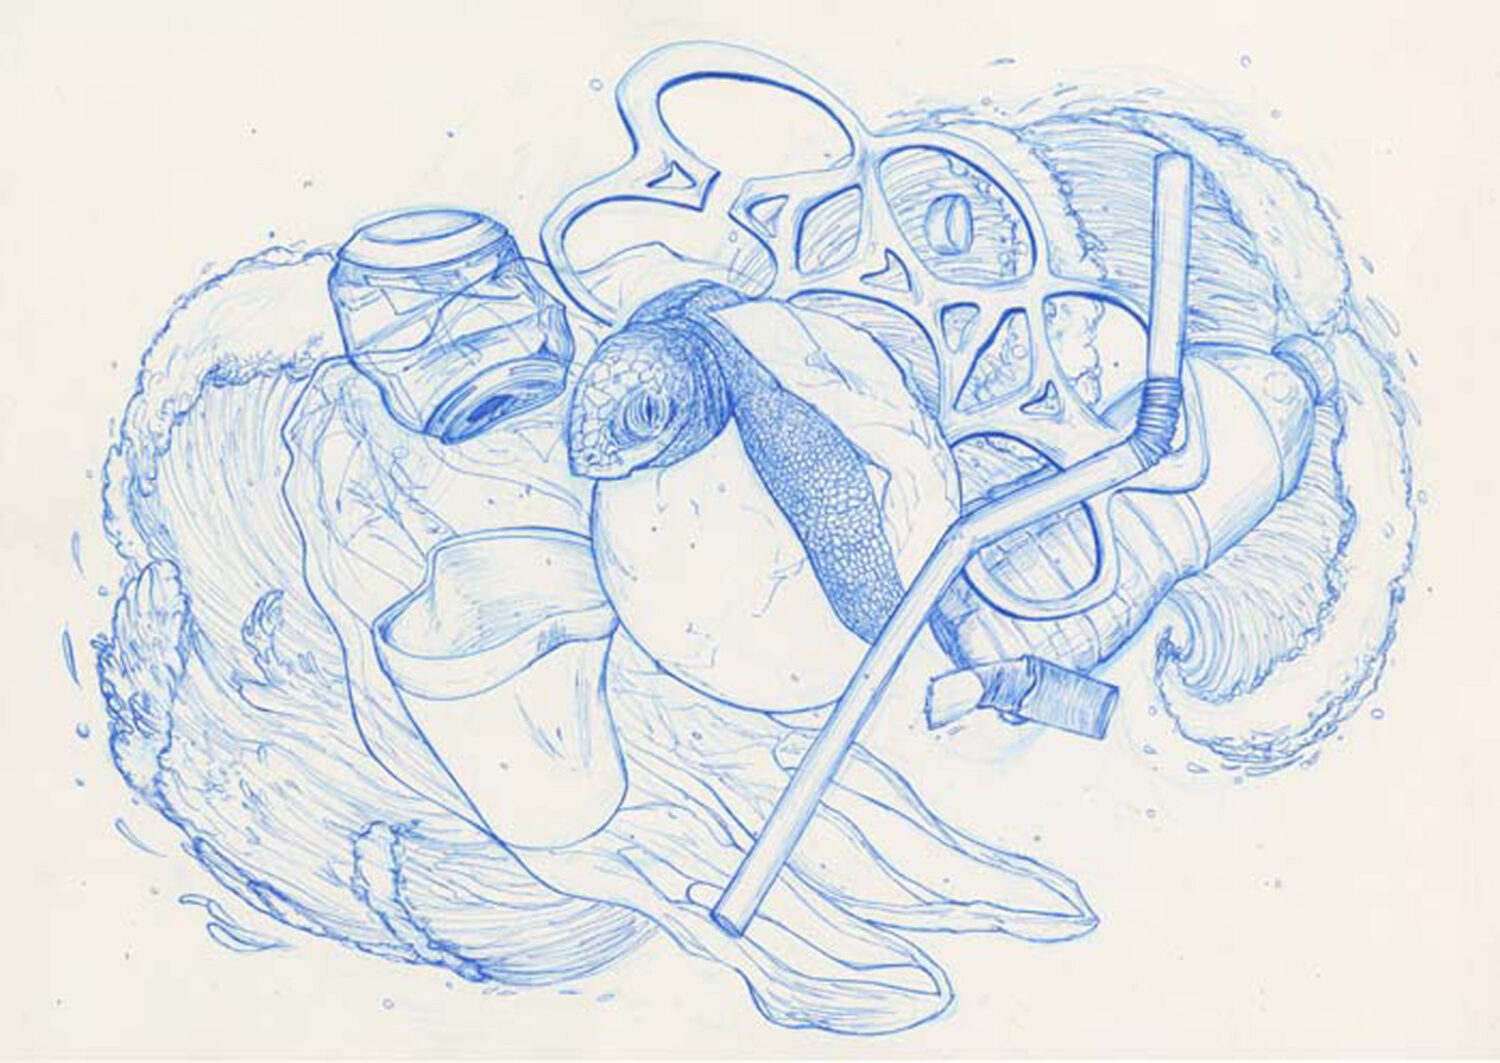 thumbnail of Ink on Bristol by Emely Yauri titled Waste.